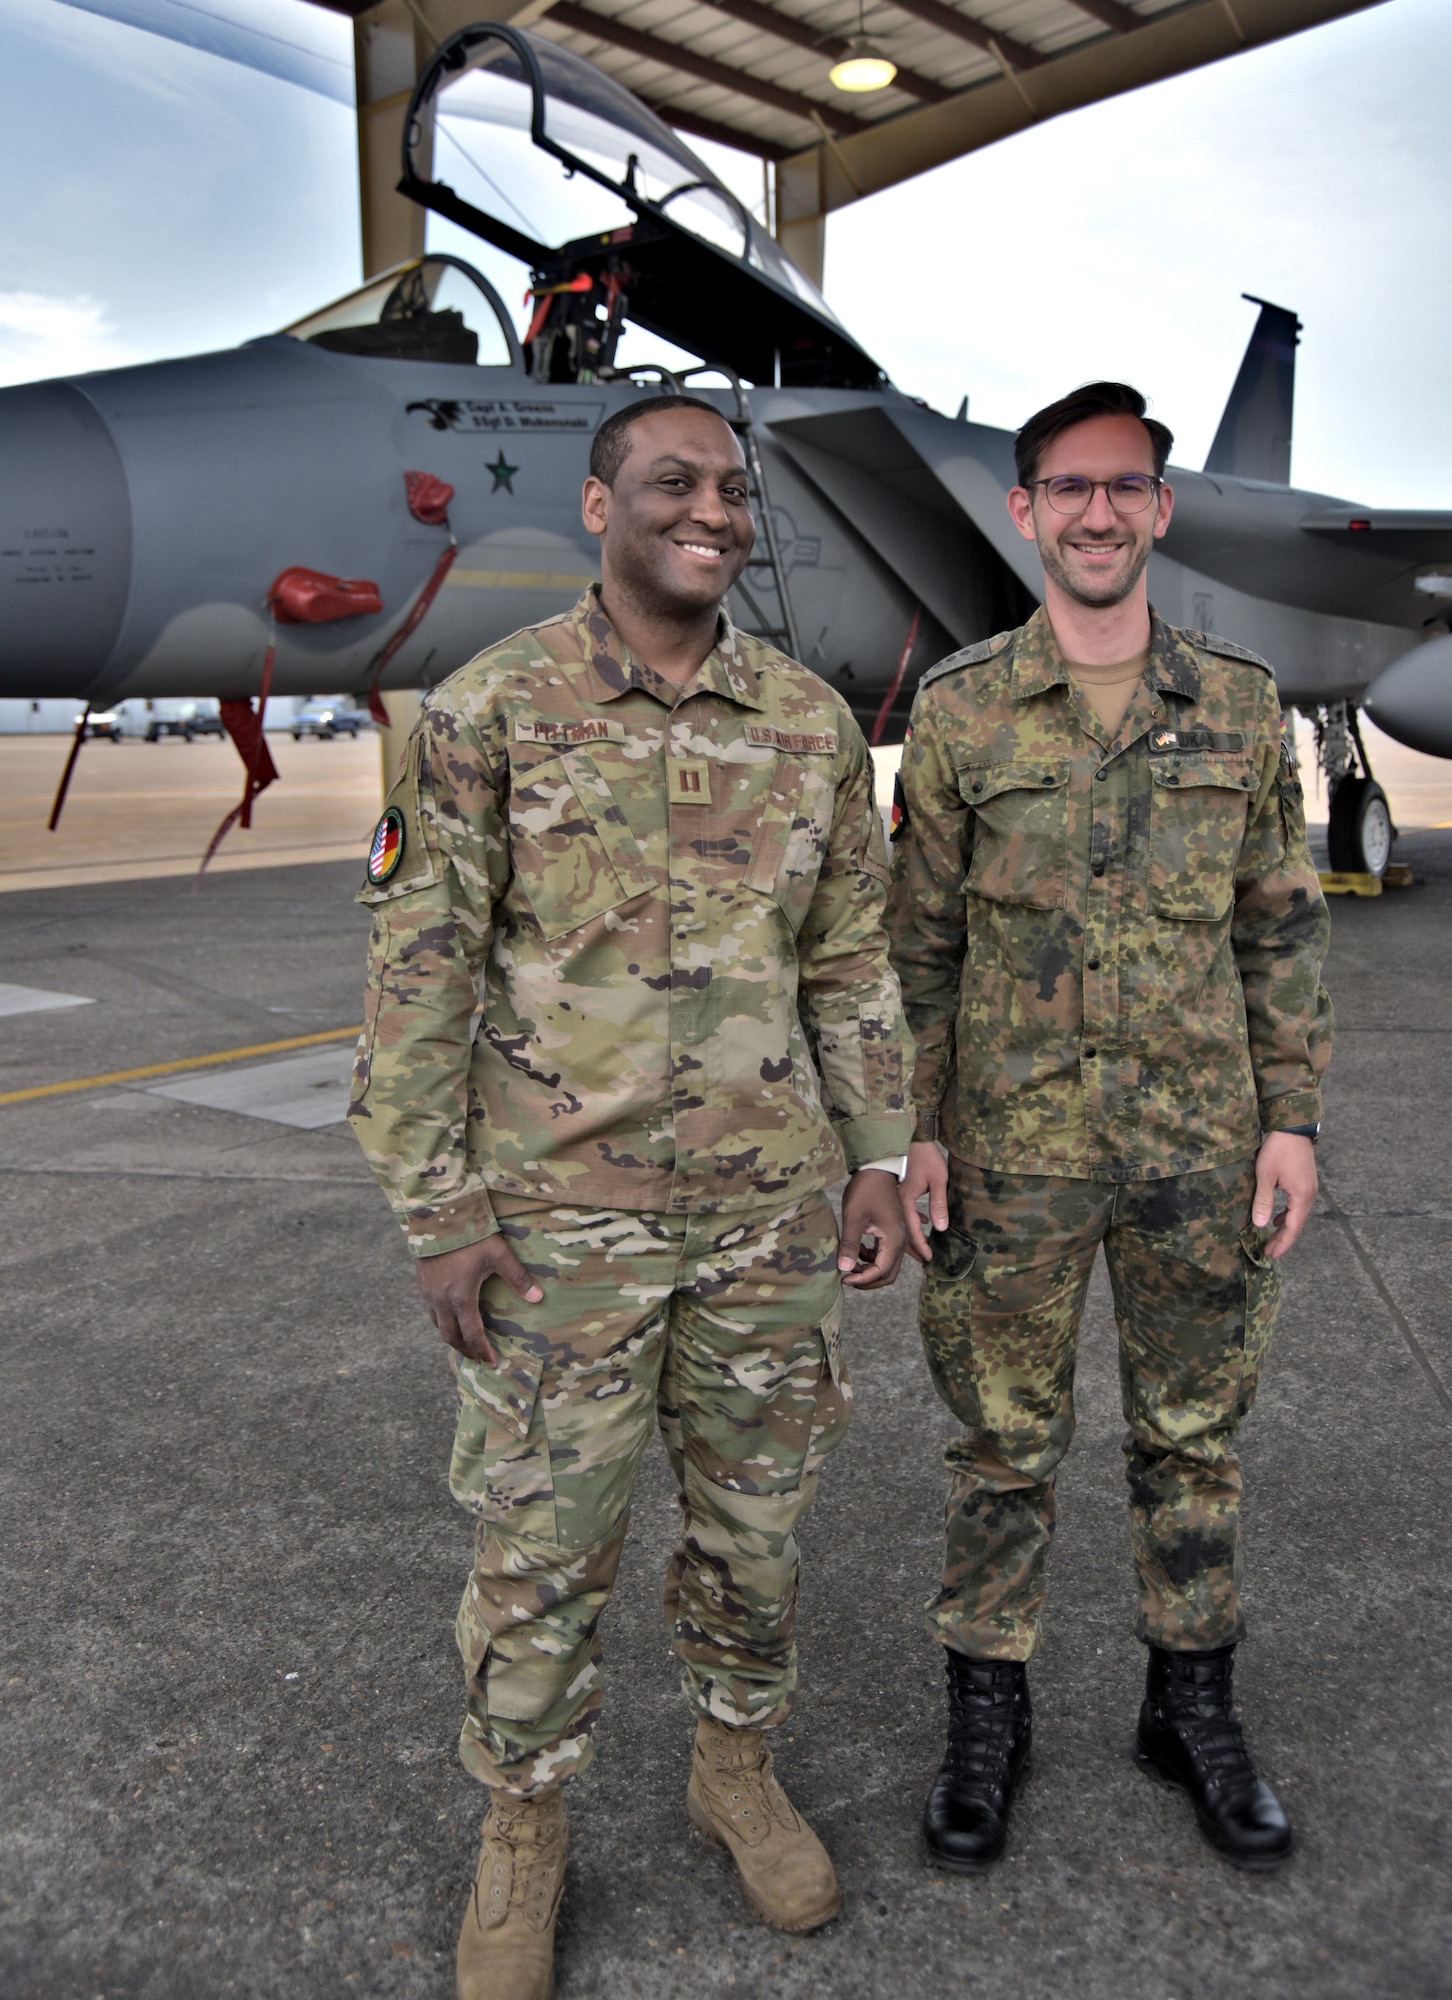 Captain Philipp Lukas (right) of the German Reserve Air Force and Captain Dewayne Pittman (left) of the 142nd Aircraft Maintenance Squadron pose in front of a 142nd Wing F-15C Eagle at the Portland Air National Guard Base, Portland, Ore. The two officers participated in an exchange program sending Lukas to Oregon and Pittman to Germany. The Military Reserve Exchange Program (MREP) has been strengthening international relationships as a program for NATO servicemembers to build cultural understanding and regional expertise.  (U.S. Air National Guard photo by Mr. Steven Conklin)